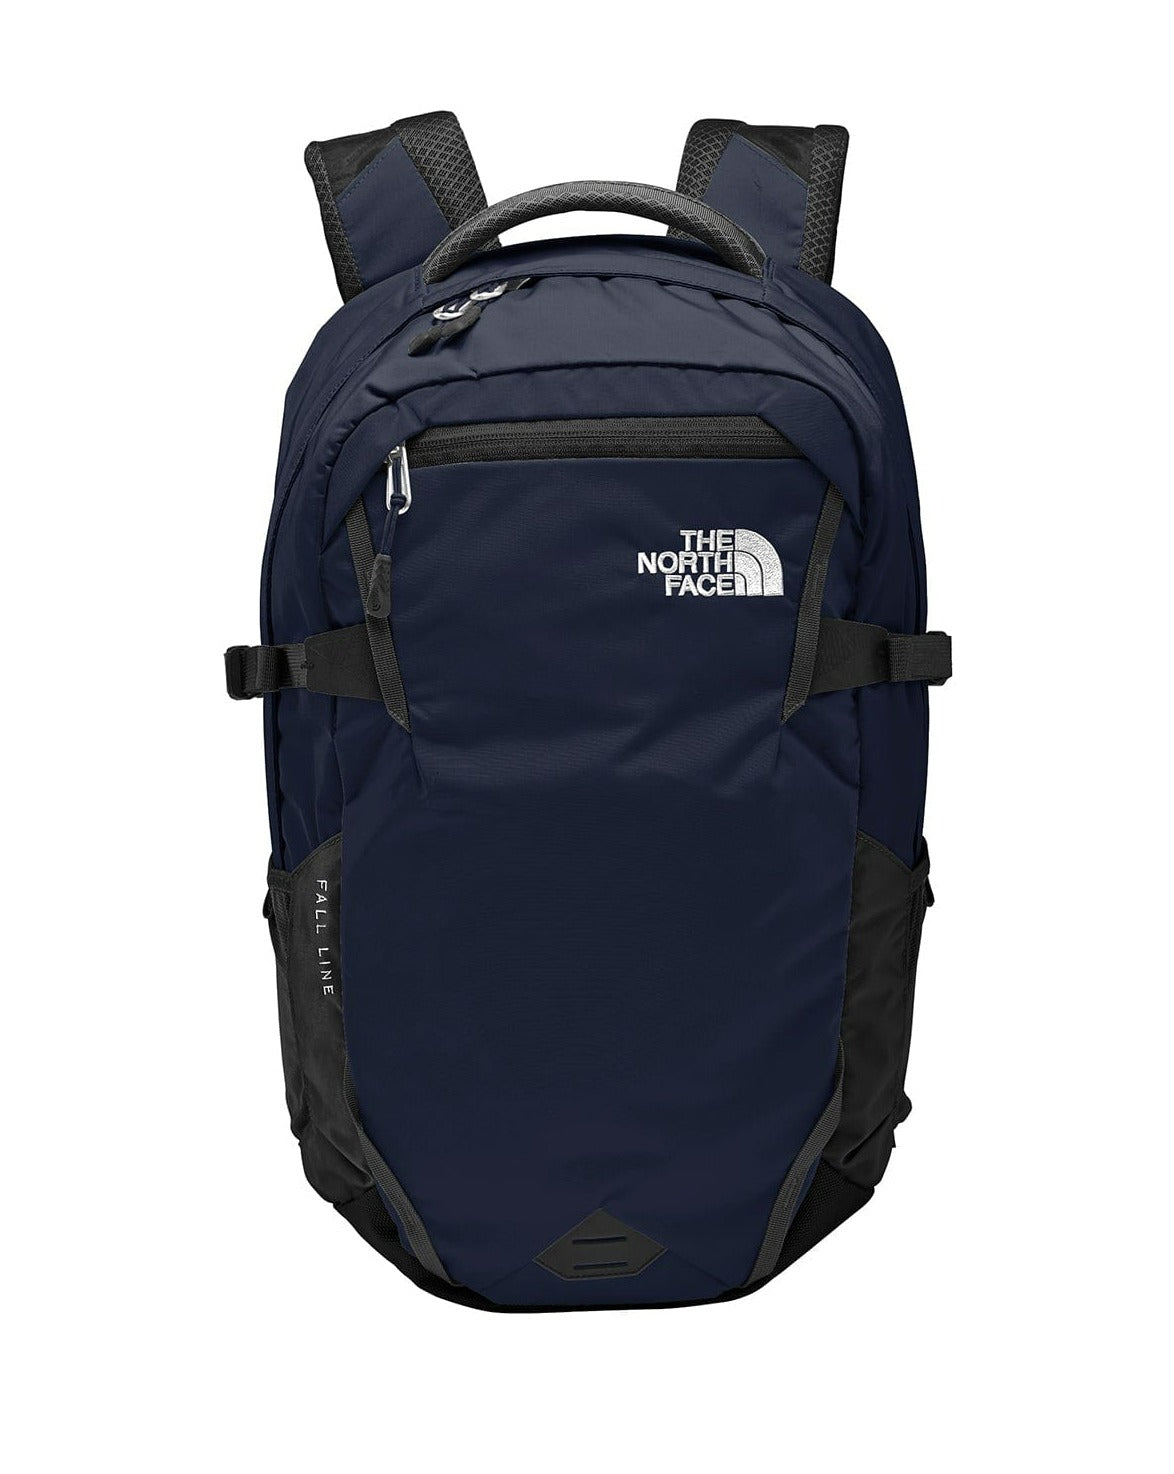 THE NORTH FACE LUMBNICAL BUM BAG - SMALL